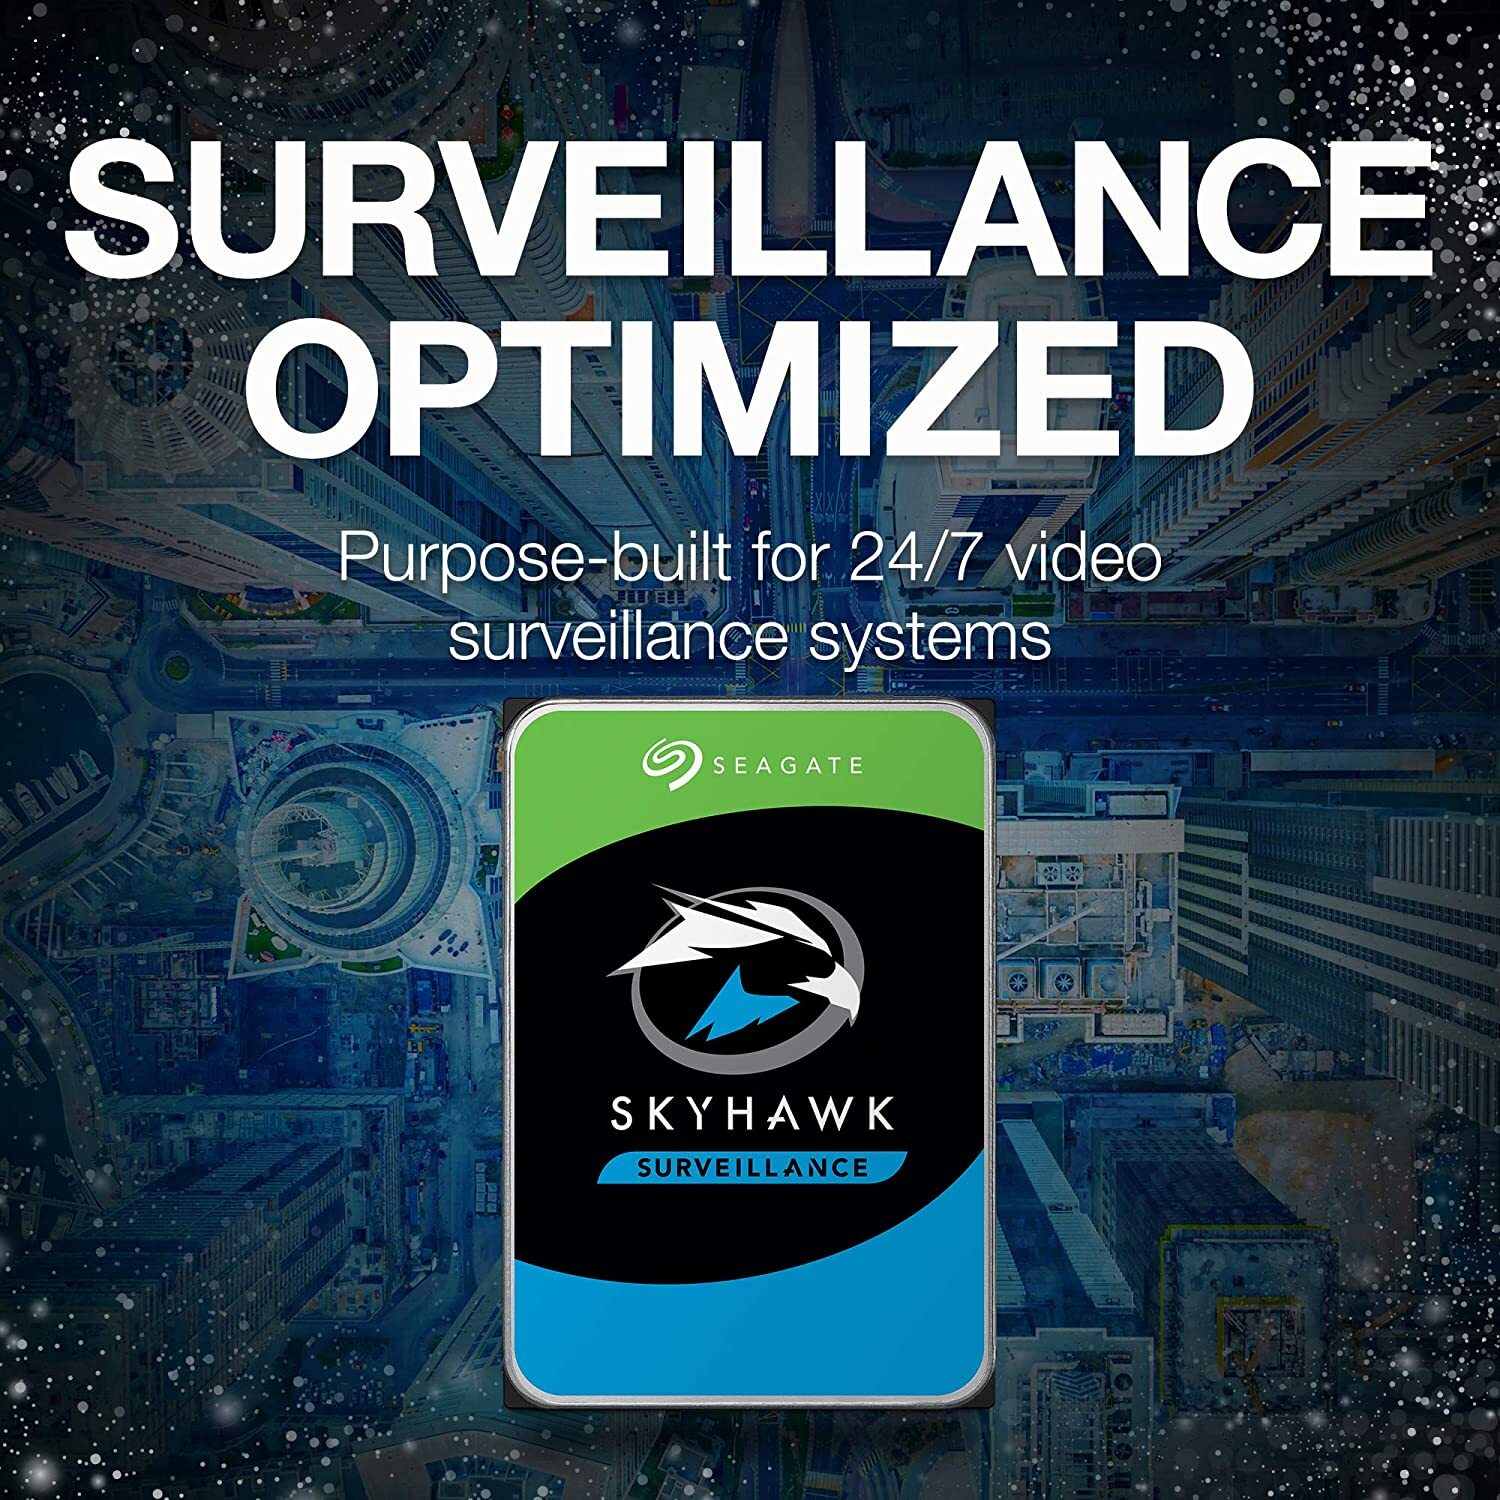 Seagate Skyhawk 8TB Surveillance Internal Hard Drive HDD 3.5 Inch SATA 6GB/s 256MB Cache for DVR NVR Security Camera System with Drive Health Management